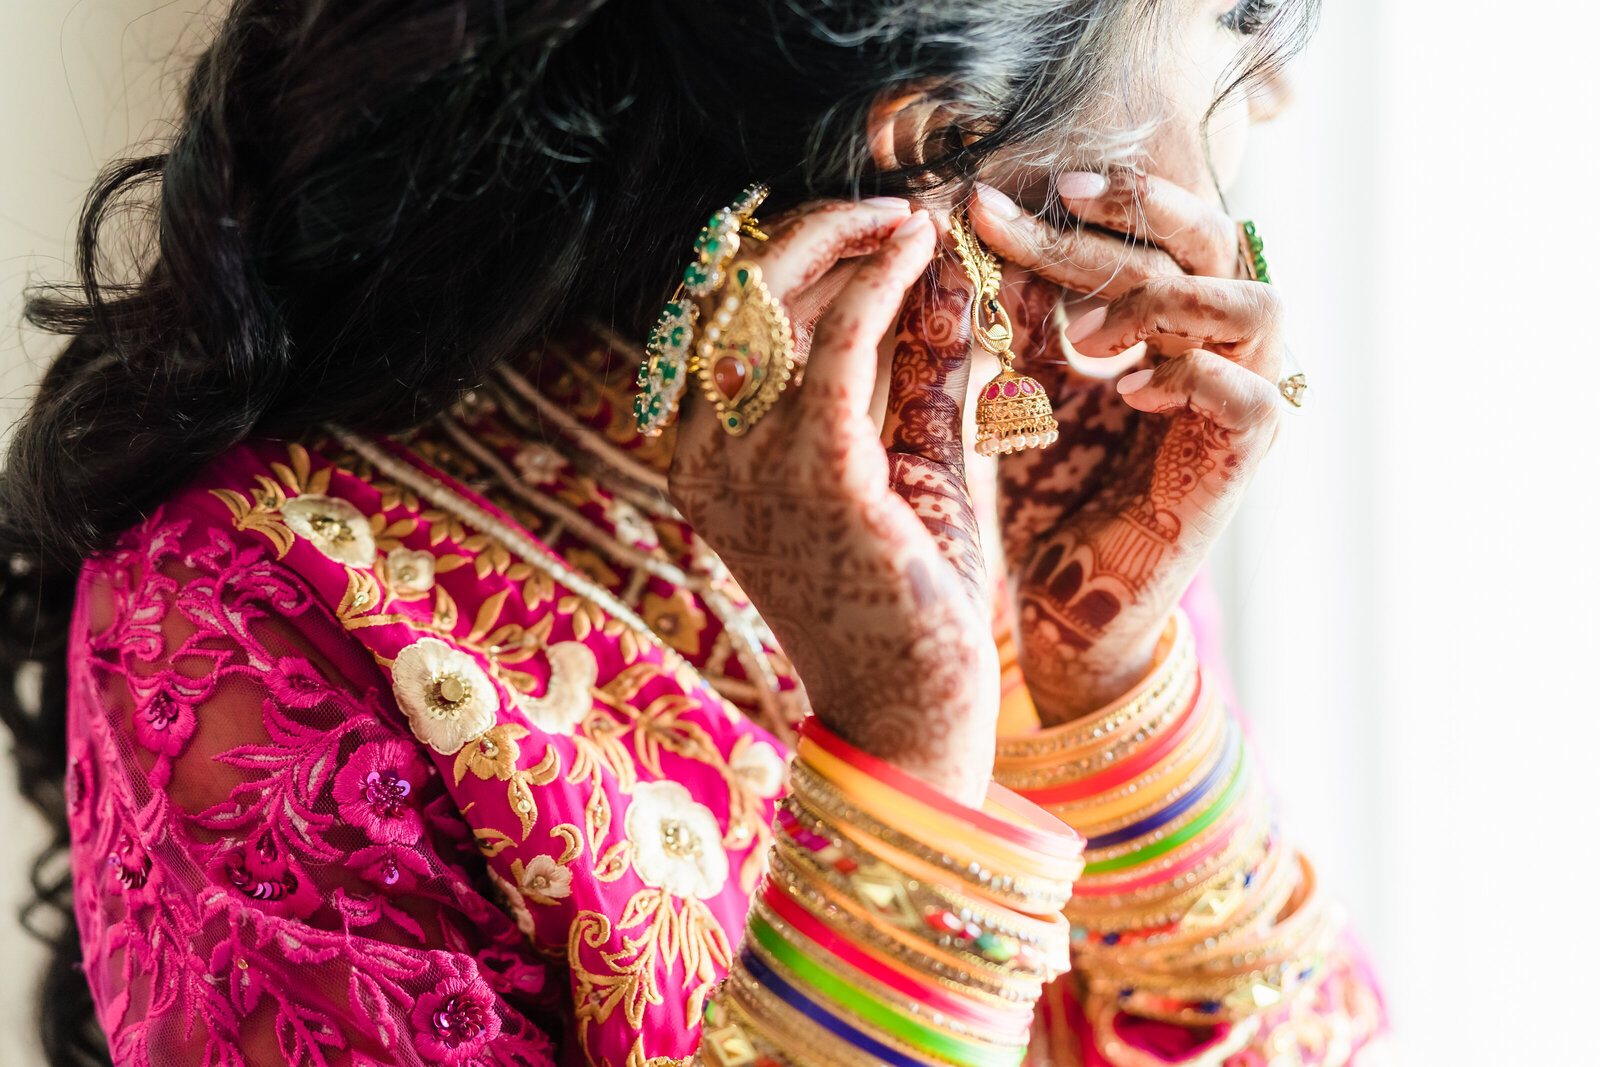 A South Asian bride puts on her earring, showing off her henna